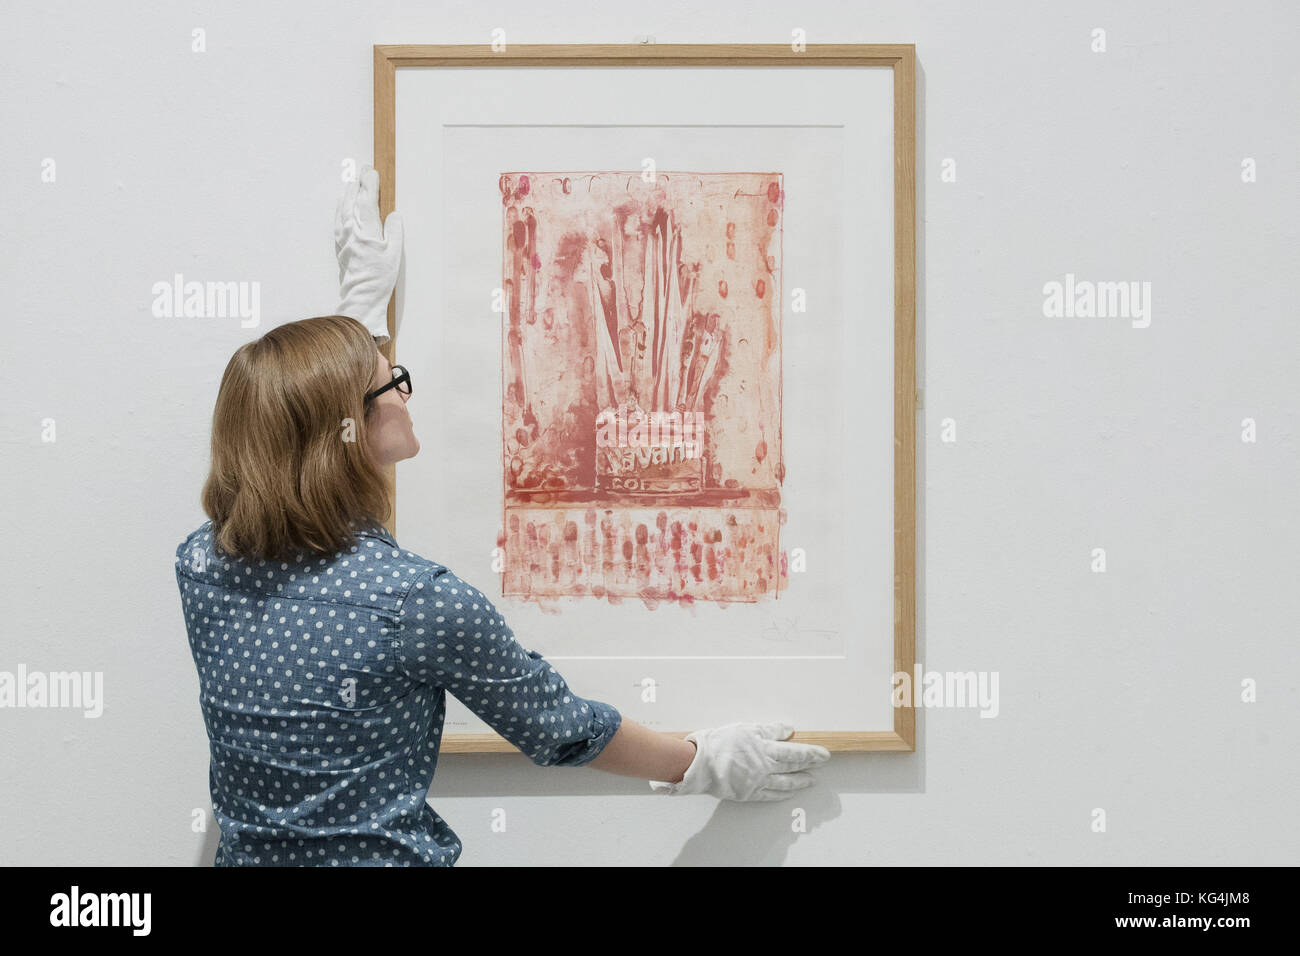 Emalee Beddoes-Davis museum curator adjusts Jasper Johns, Savarin 3 (red), 1978, on display at the Worcester City Art Gallery and Museum's Warhol to Walker: American prints from pop art to today exhibition. Stock Photo